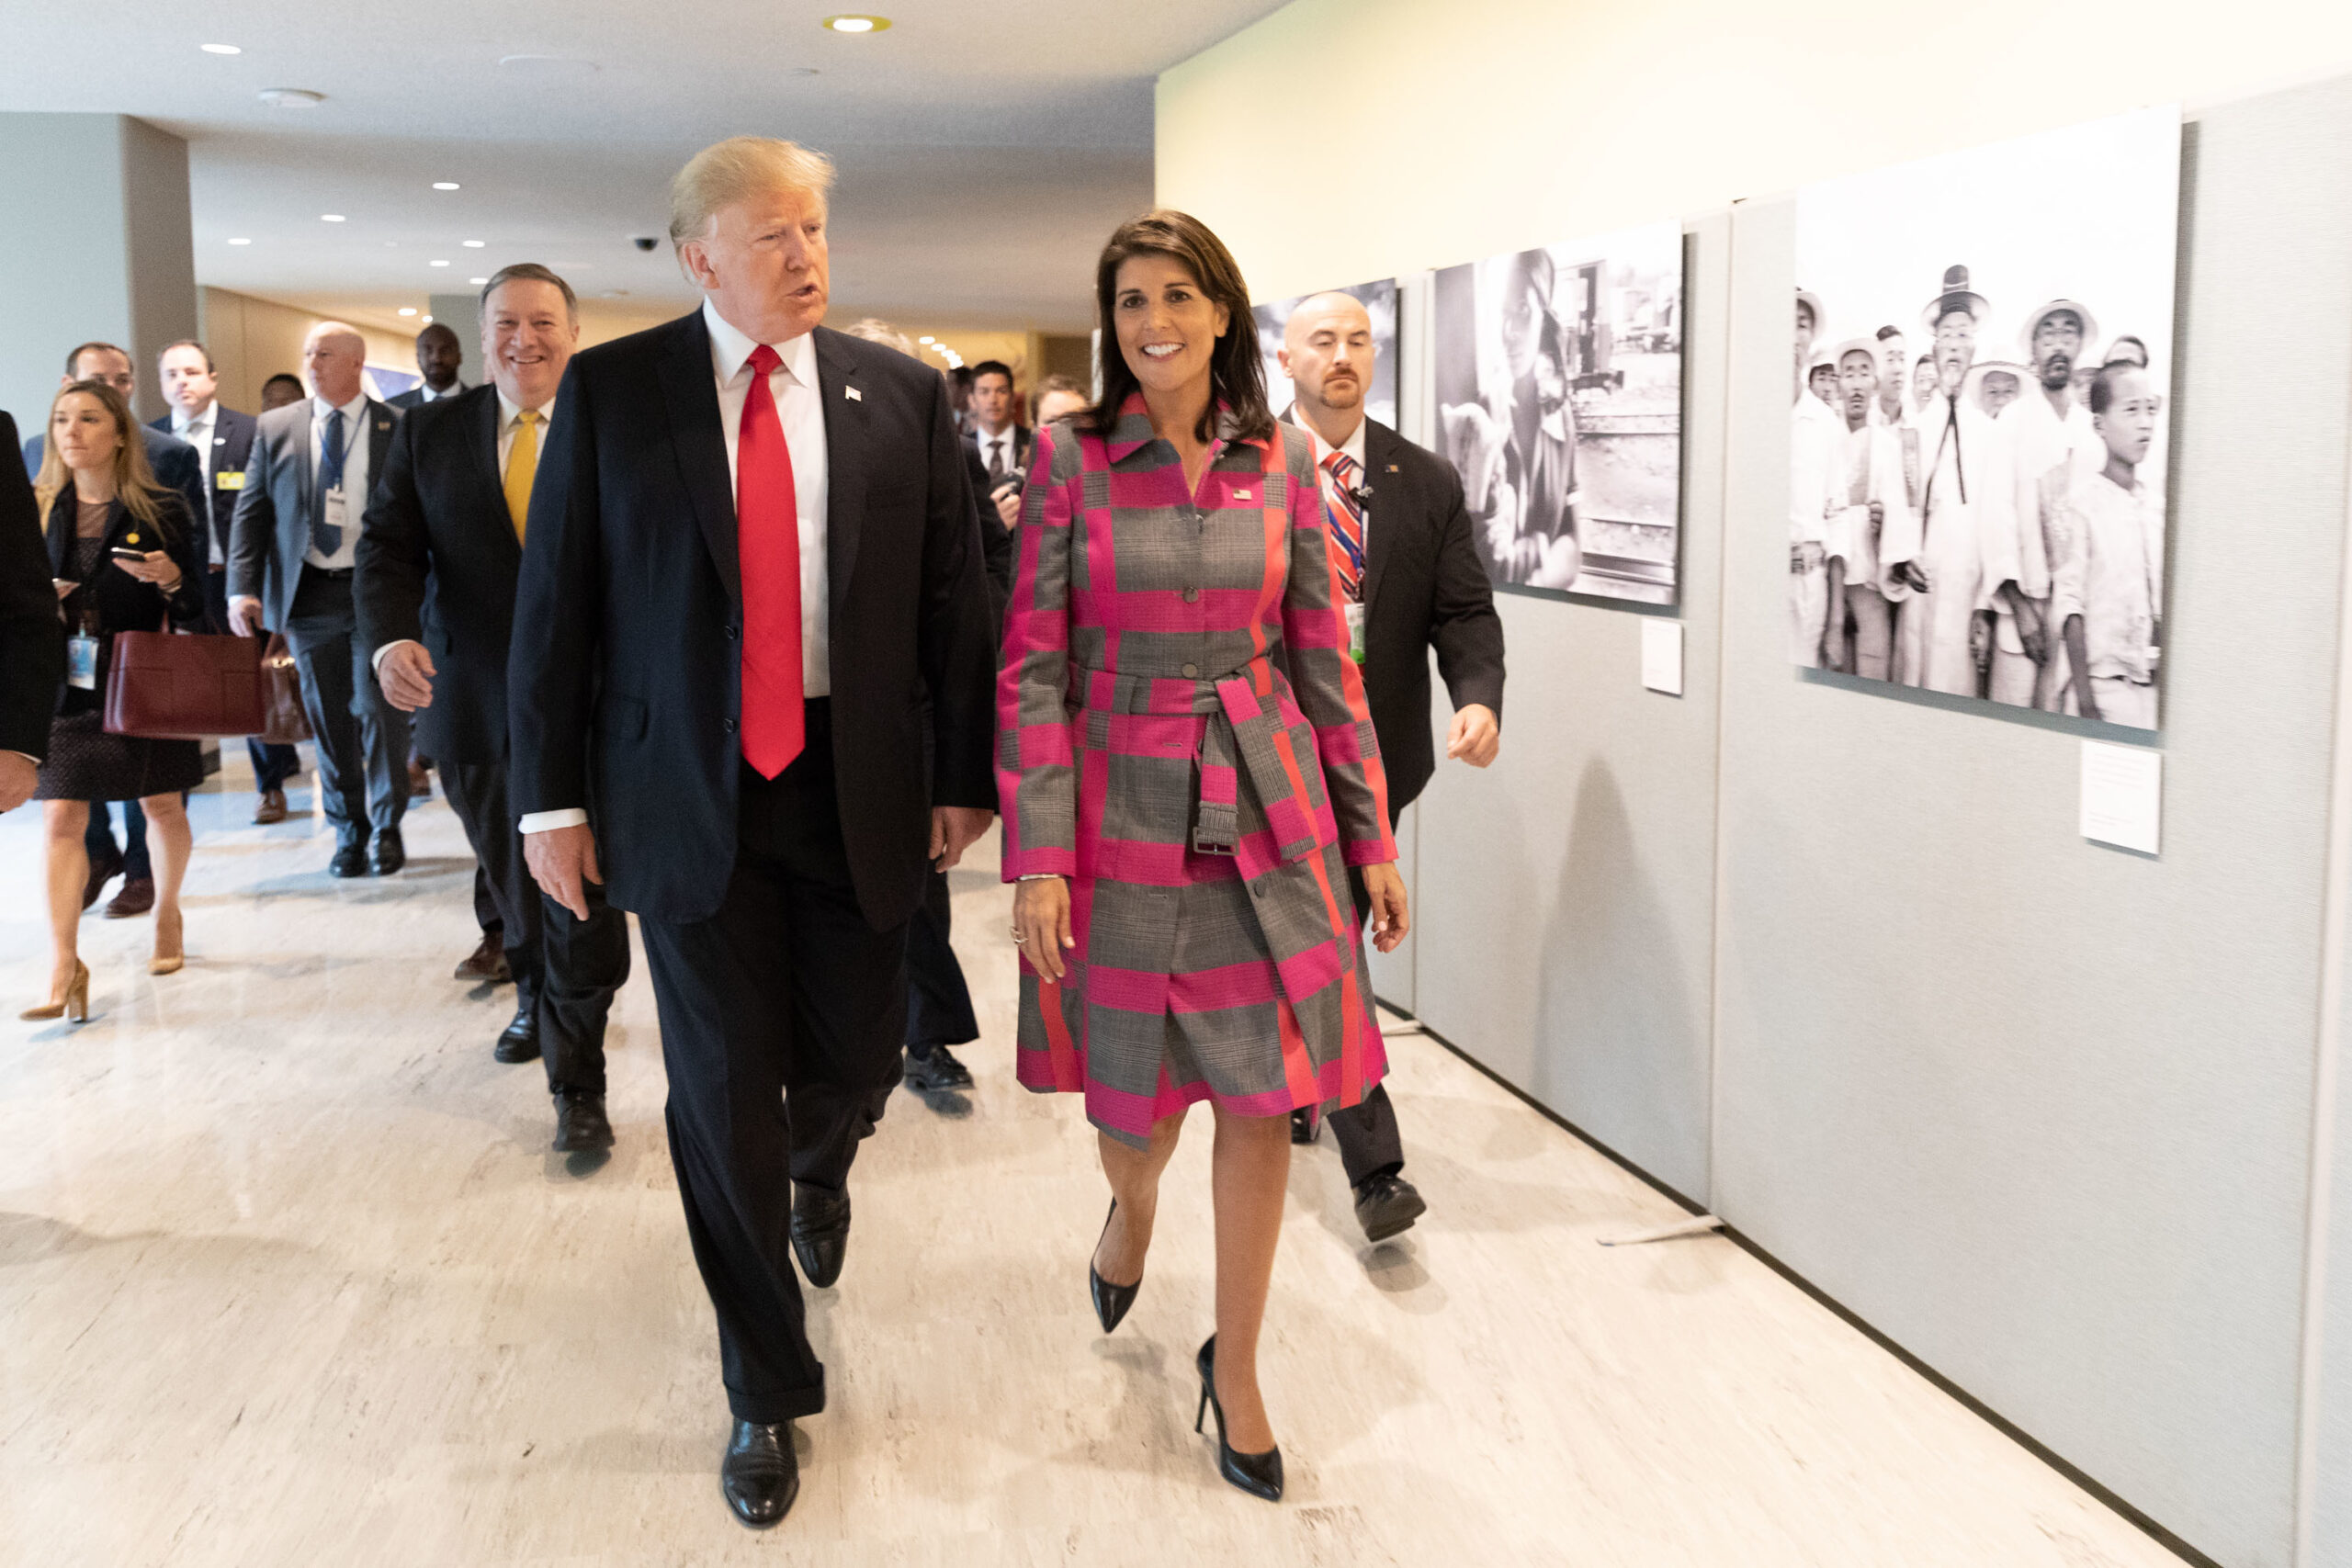 man and woman in business attire walk down a hallway